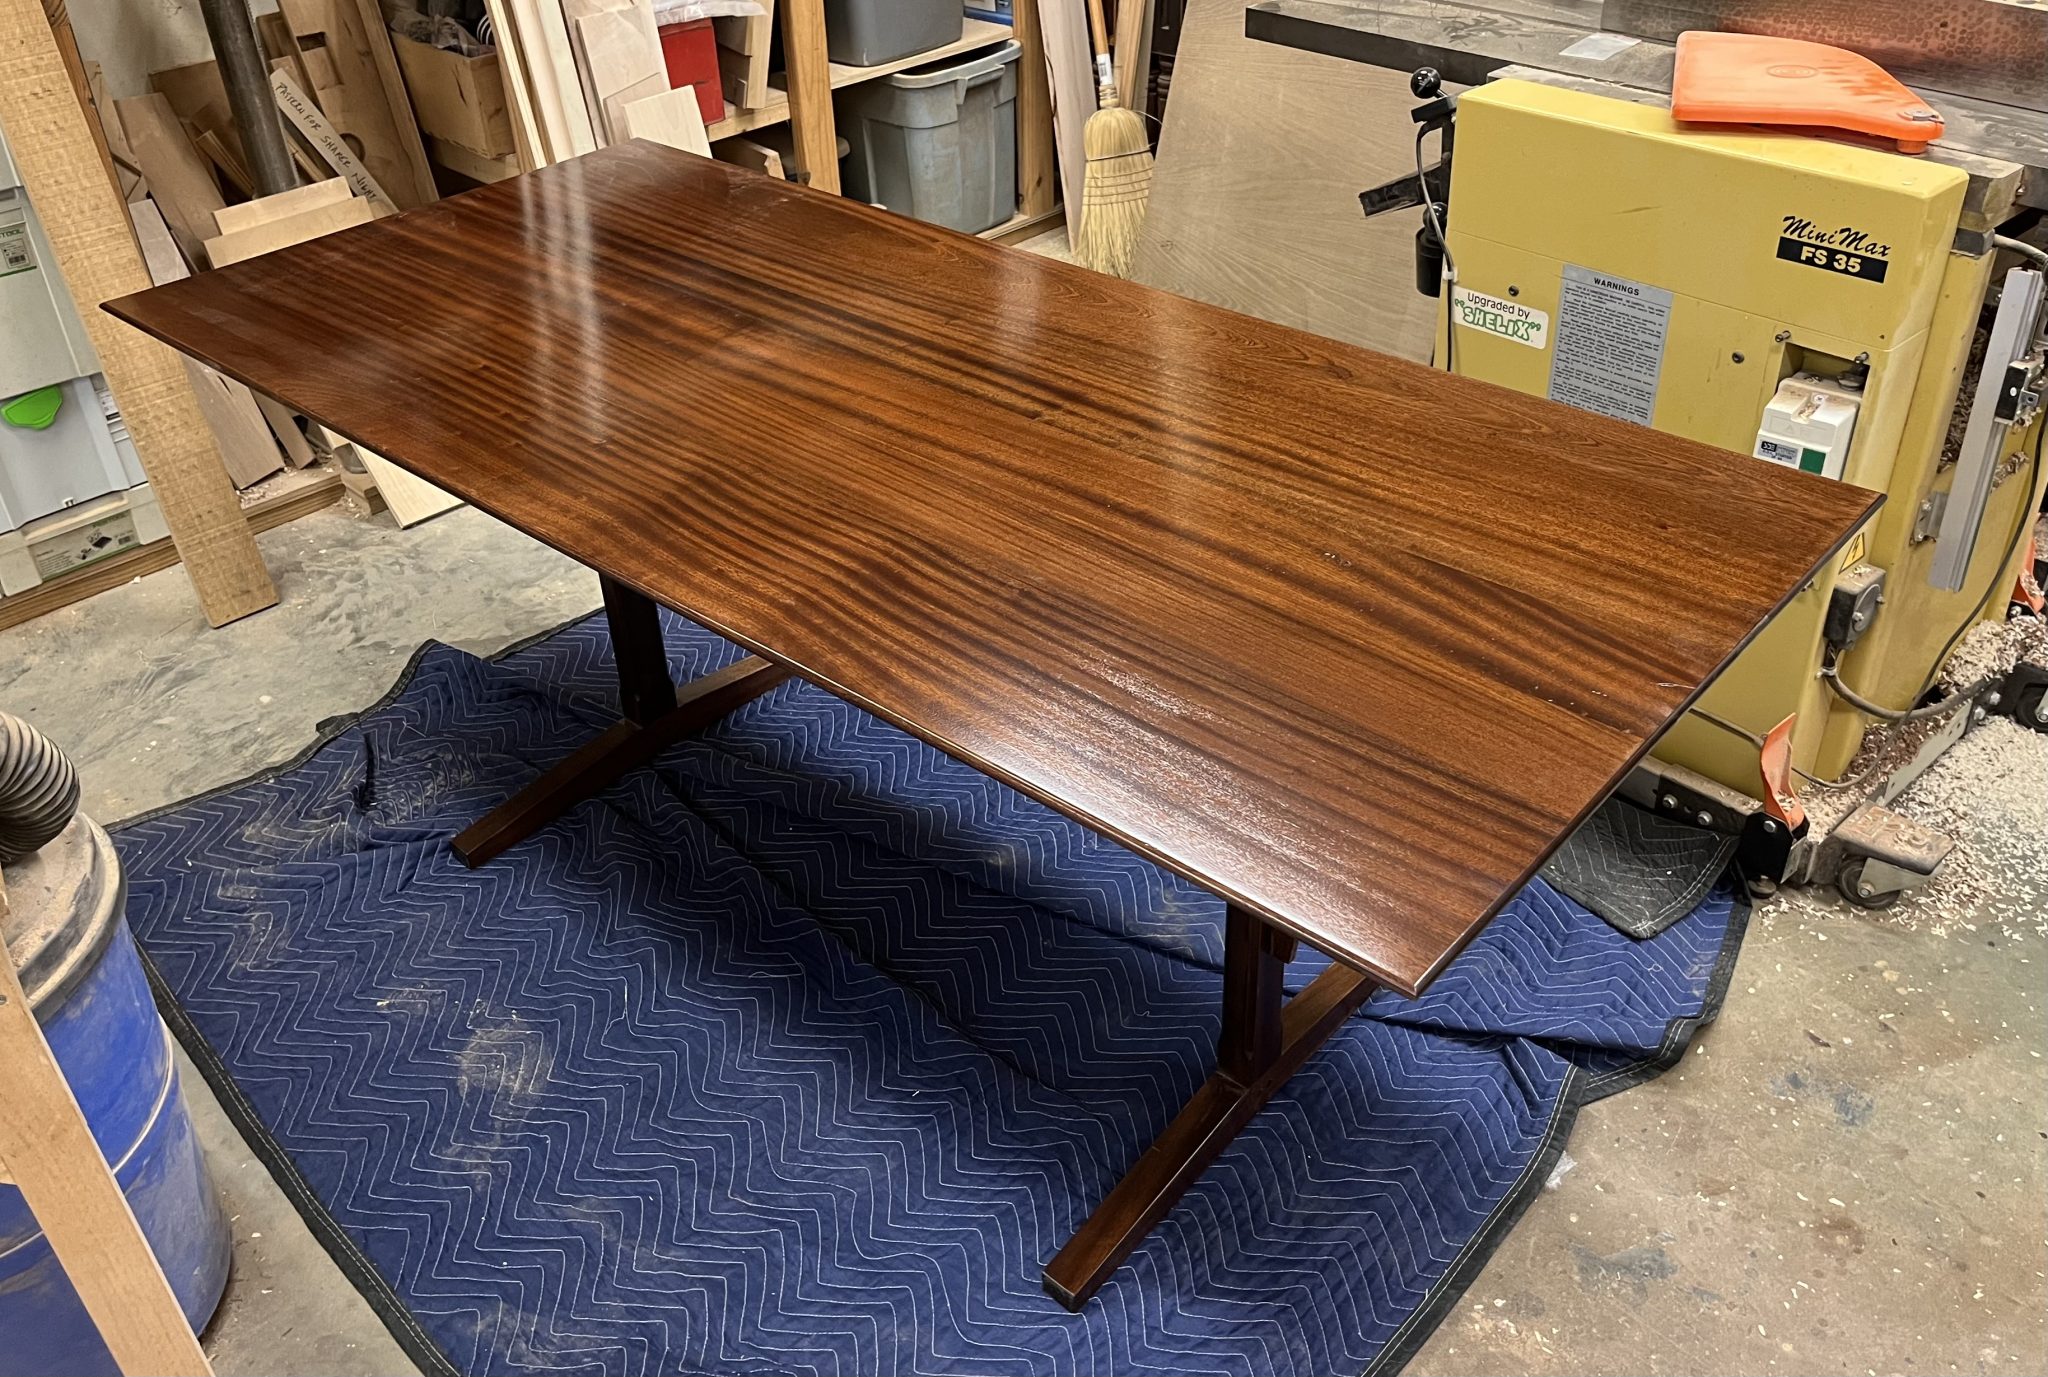 Trestle type dining room table in Sapele with lacquer finish